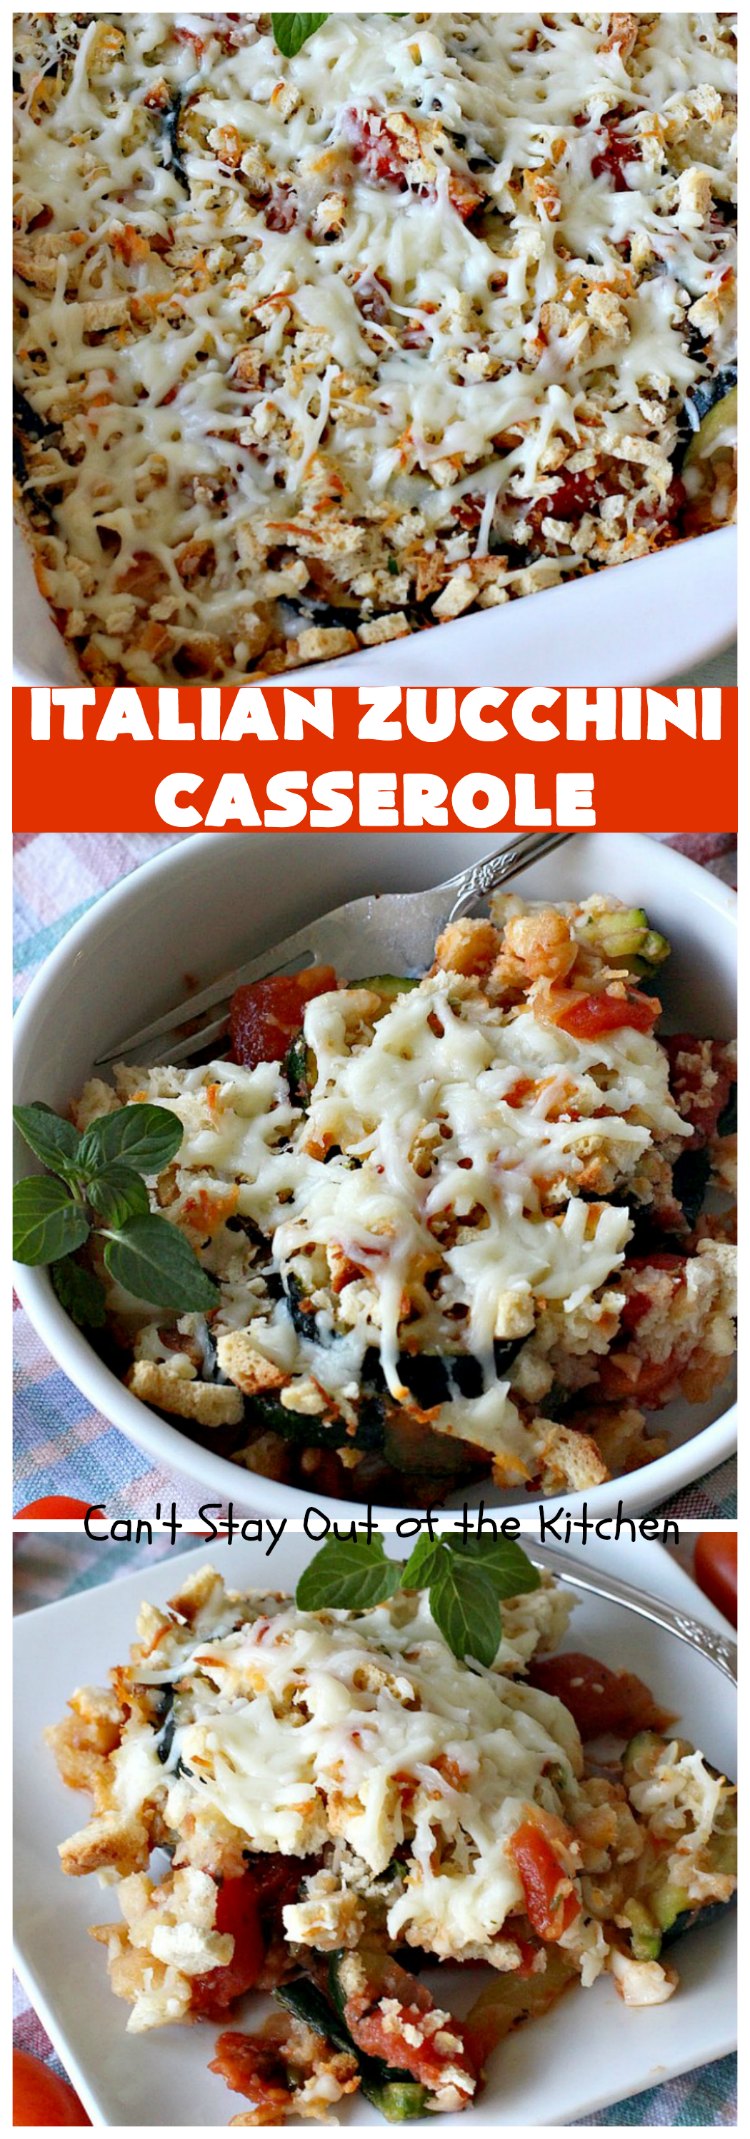 Italian Zucchini Casserole | Can't Stay Out of the Kitchen